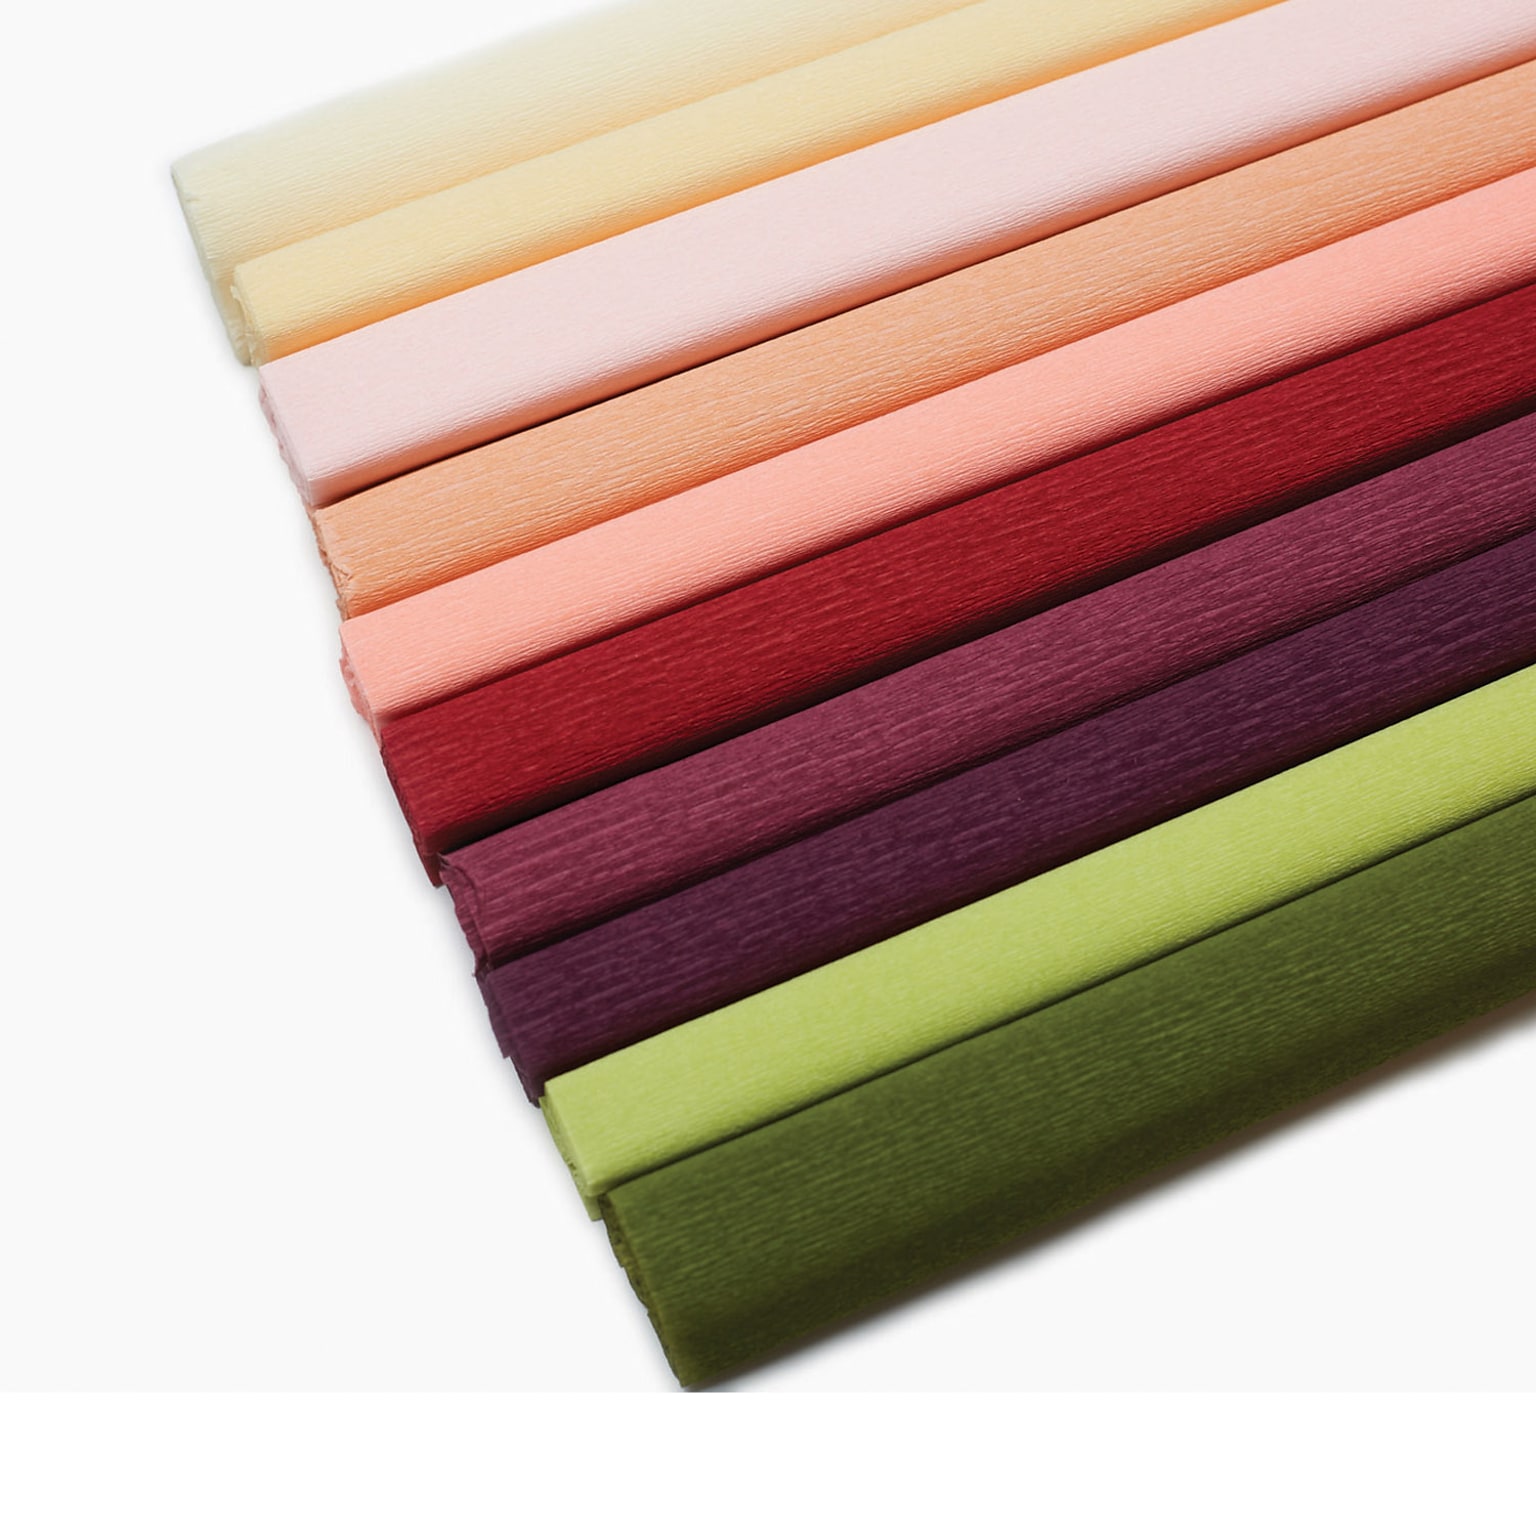 Lia Griffith™ Extra Fine Crepe Paper, 10 Assorted Colors, 10.7 sq. ft. Per Sheet, 10 Sheets (PACPLG11018)